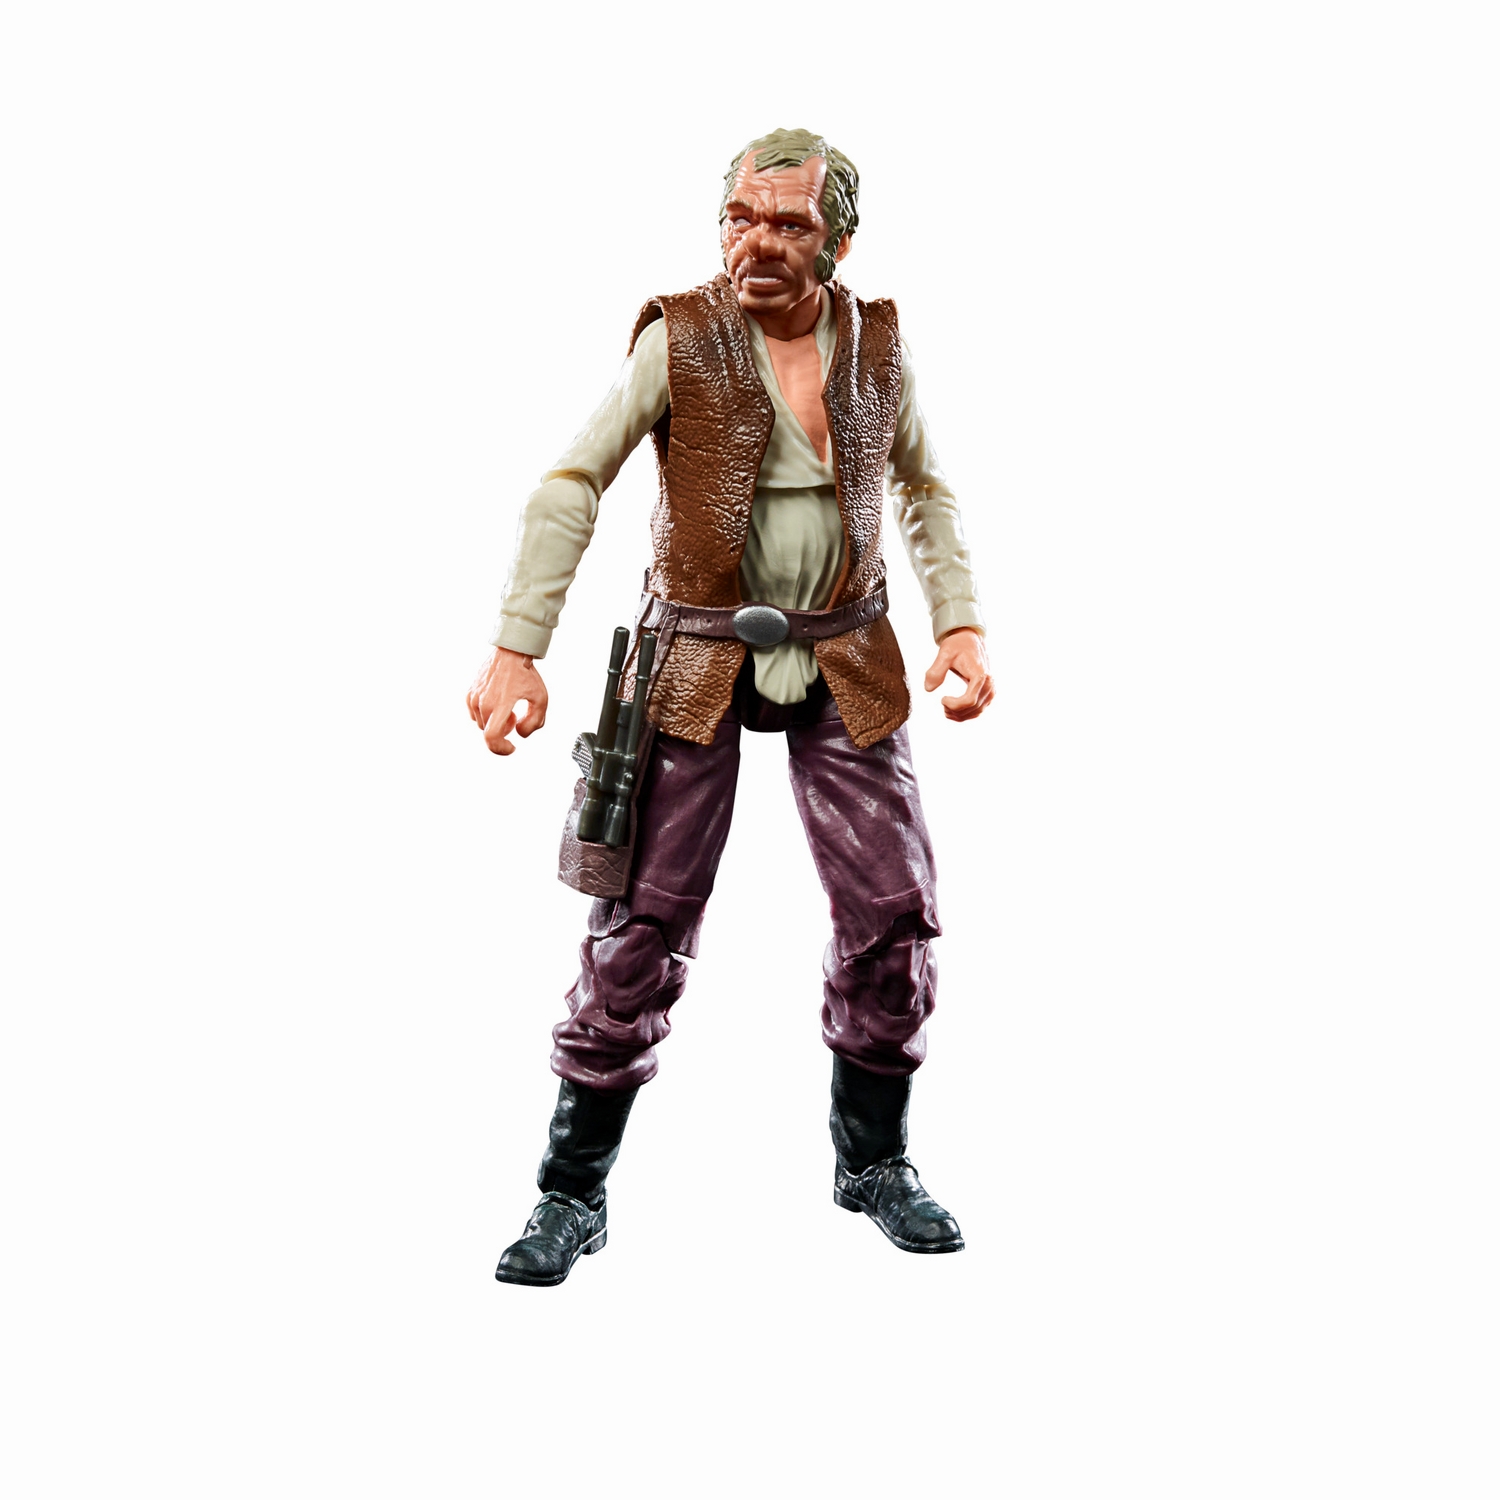 STAR WARS THE BLACK SERIES THE POWER OF THE FORCE CANTINA SHOWDOWN Playset - oop (36).jpg